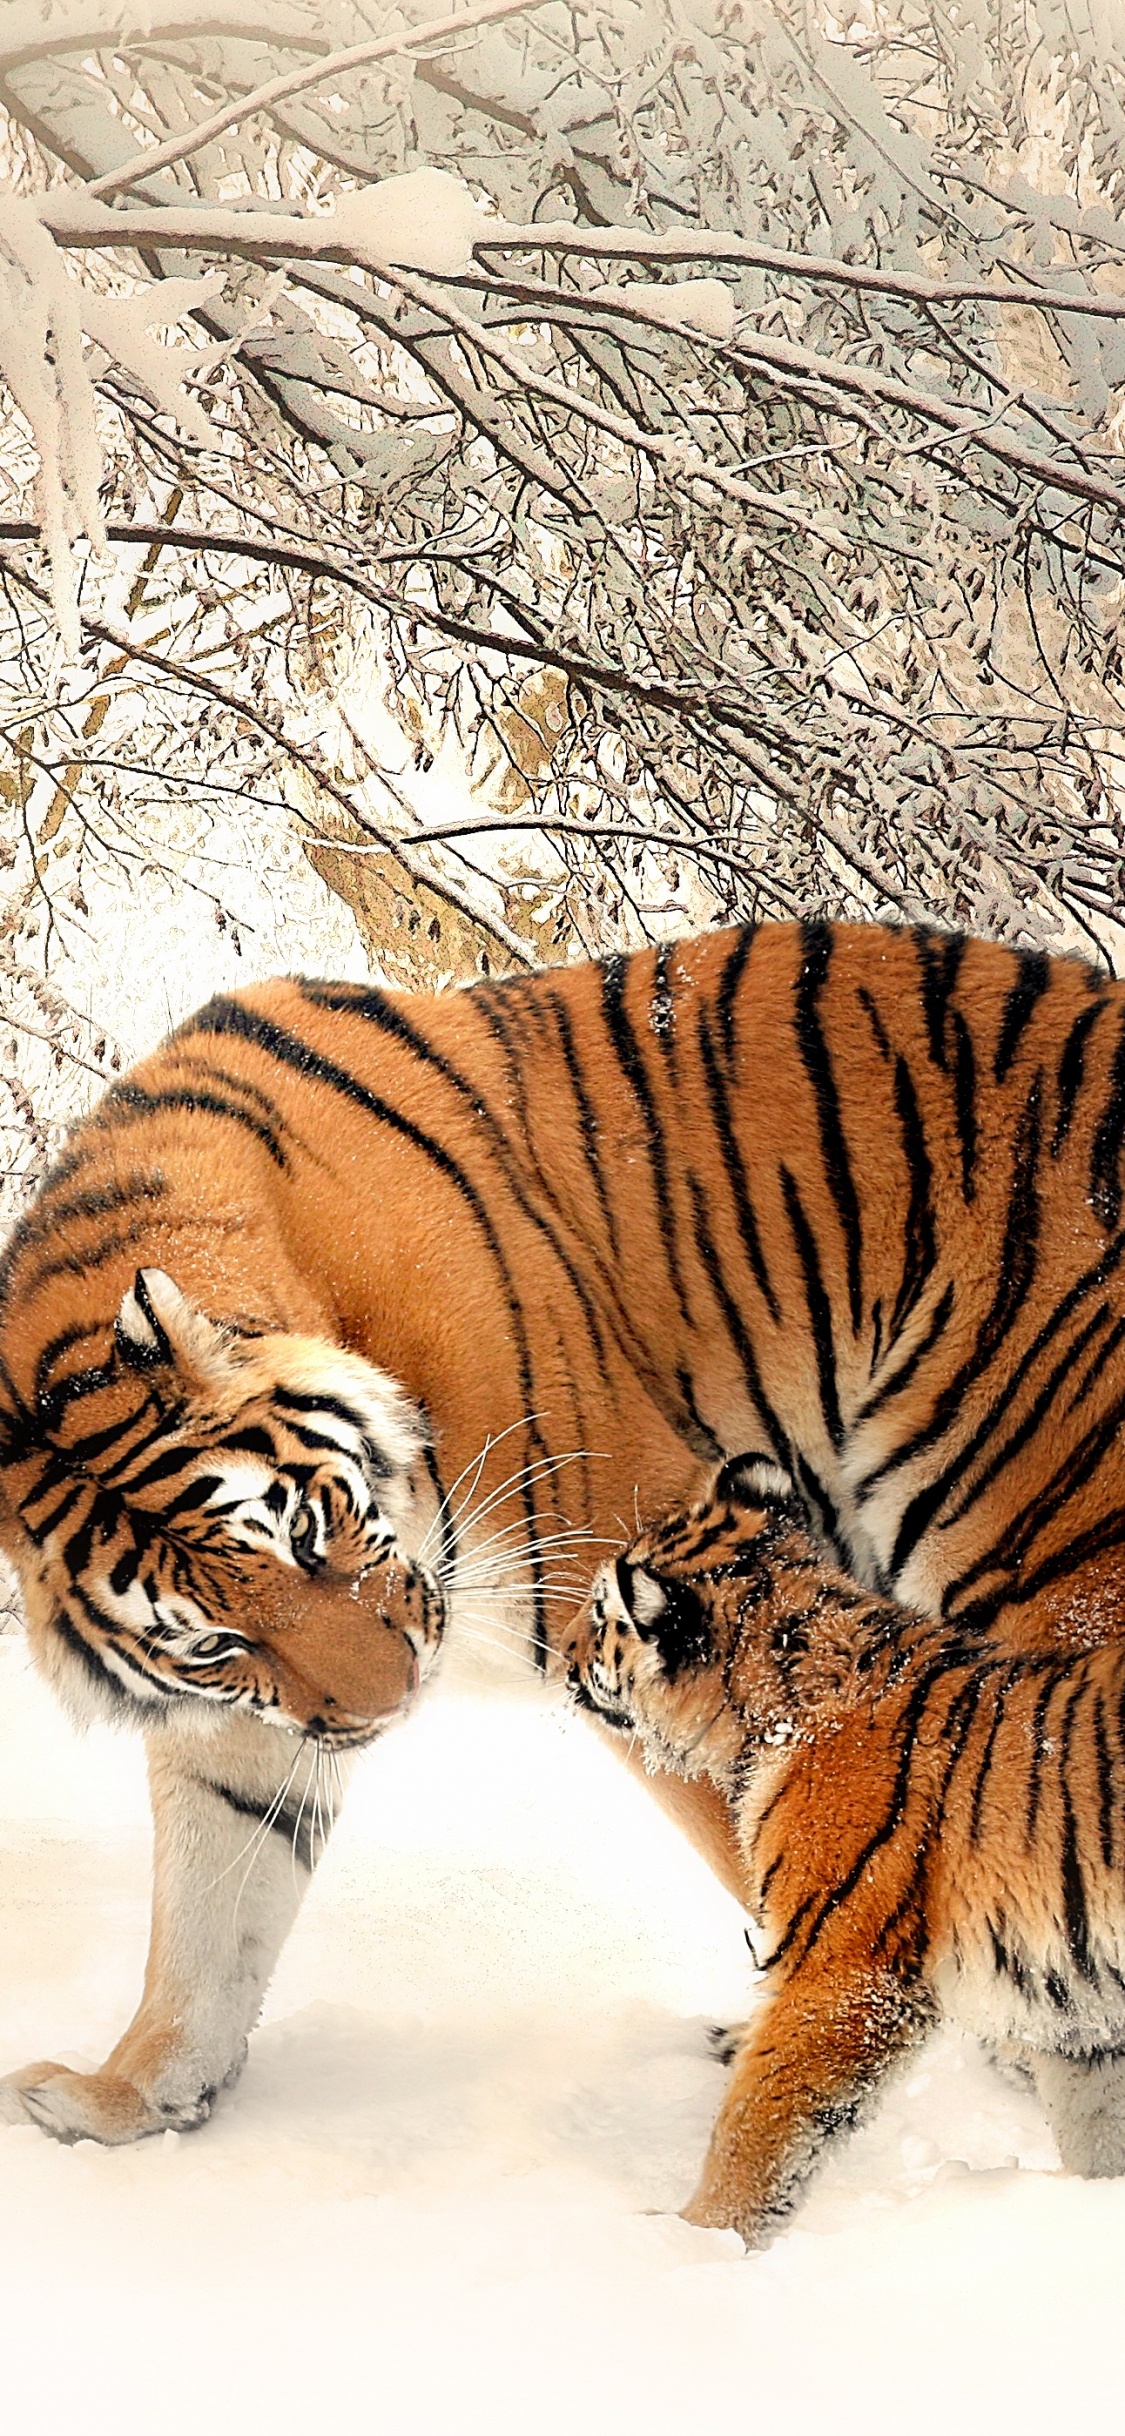 Tiger Walking on Snow Covered Ground During Daytime. Wallpaper in 1125x2436 Resolution